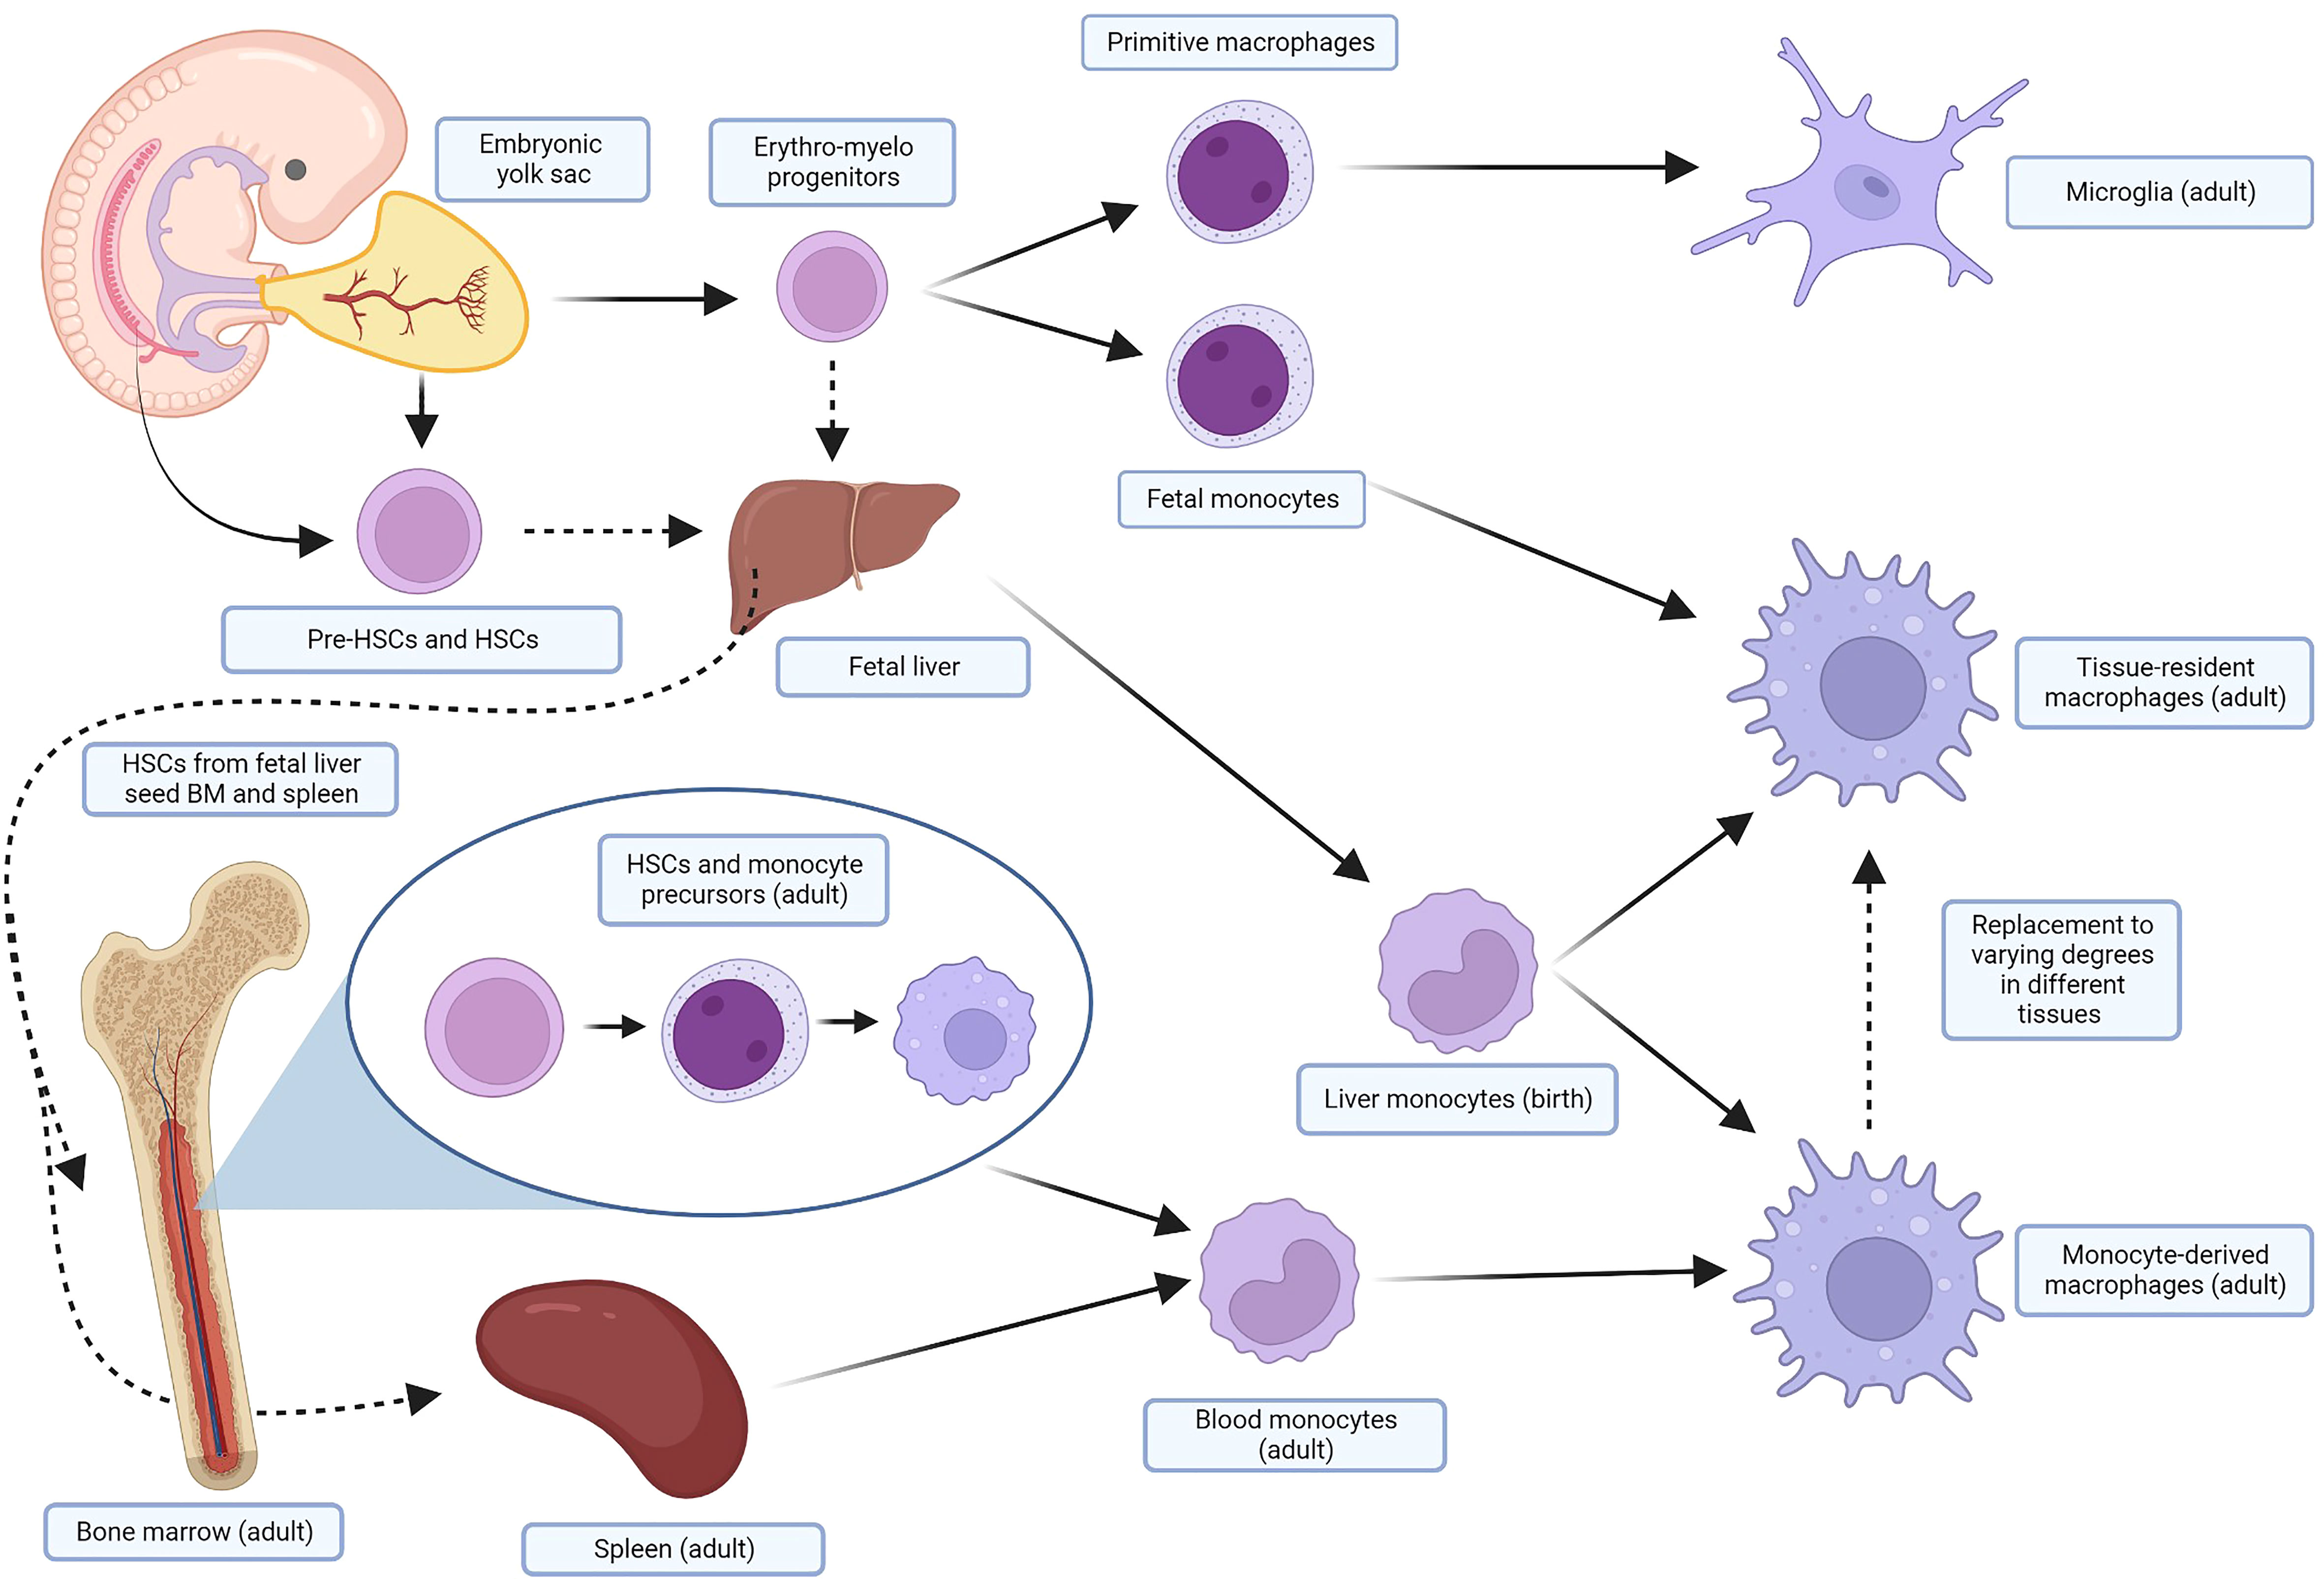 Frontiers | Tumor-associated macrophages: Prognostic and 